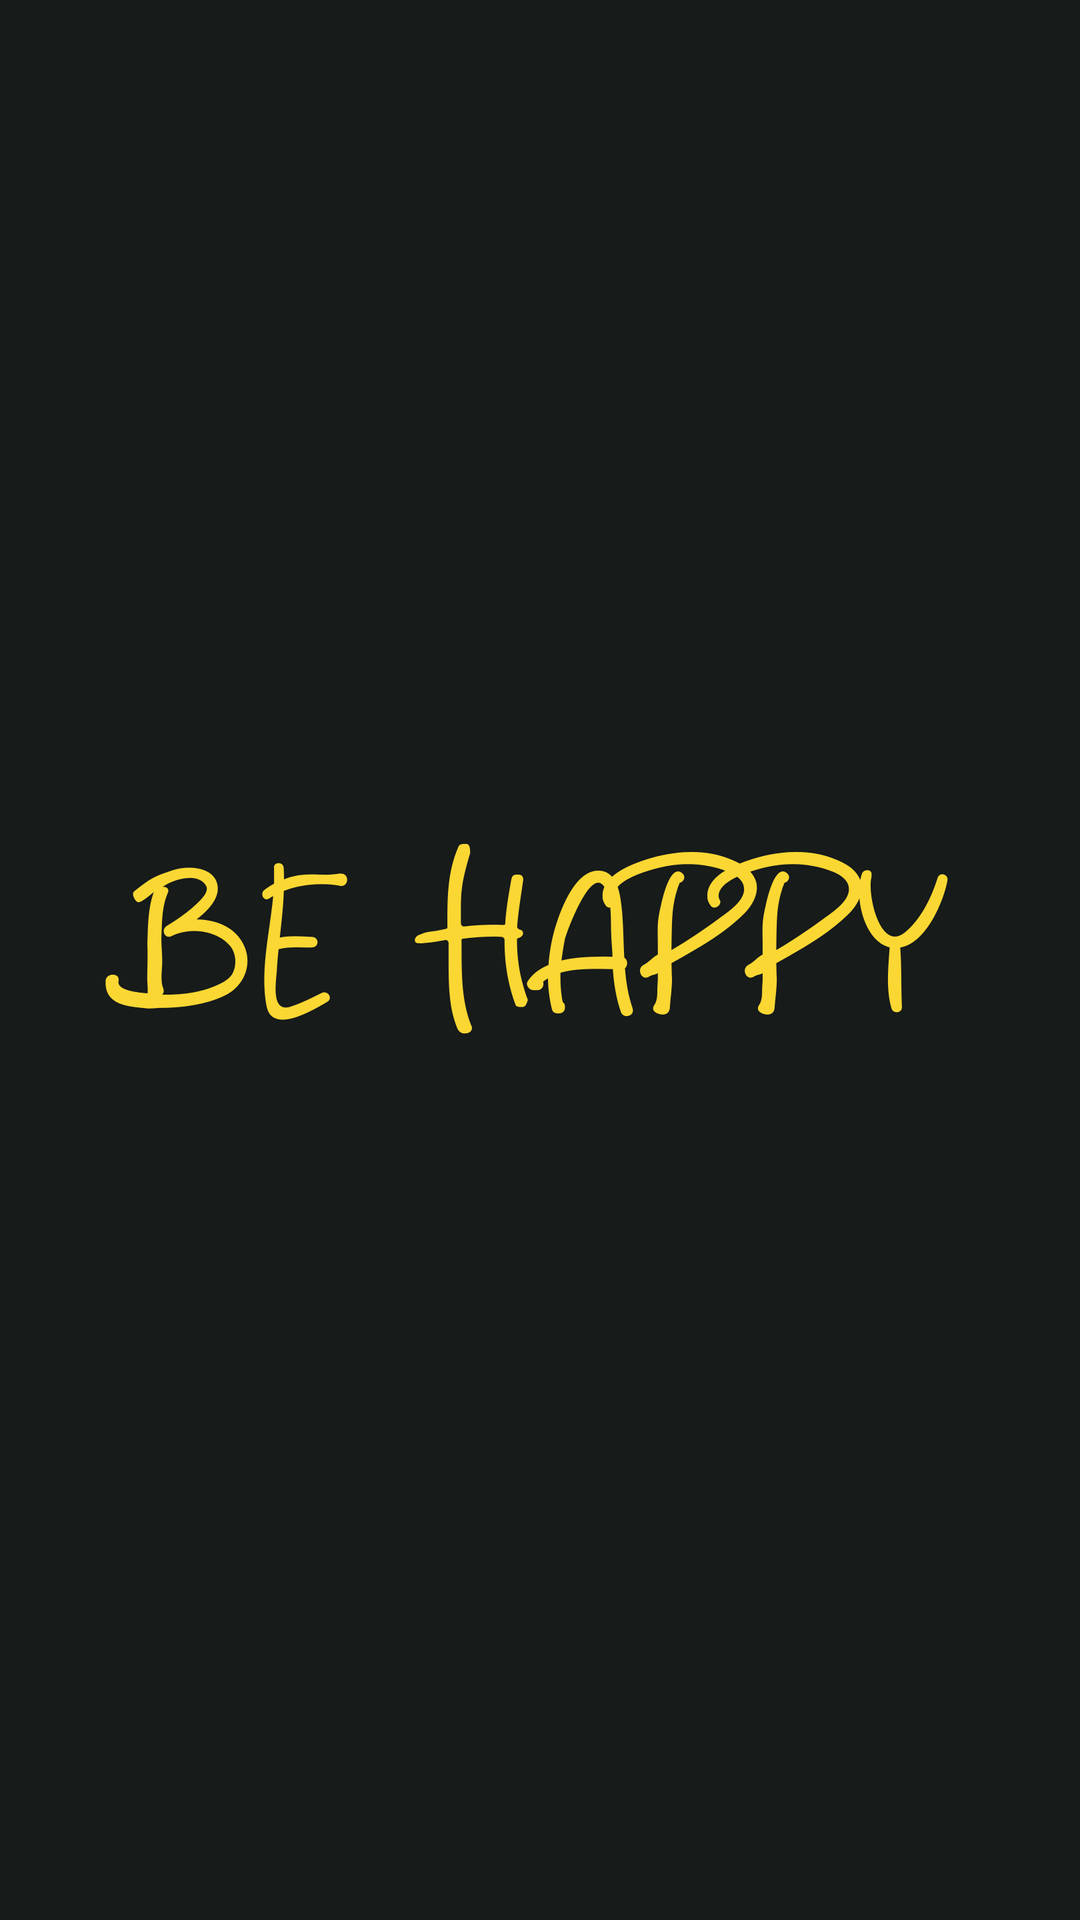 Black And Yellow Be Happy Wallpaper